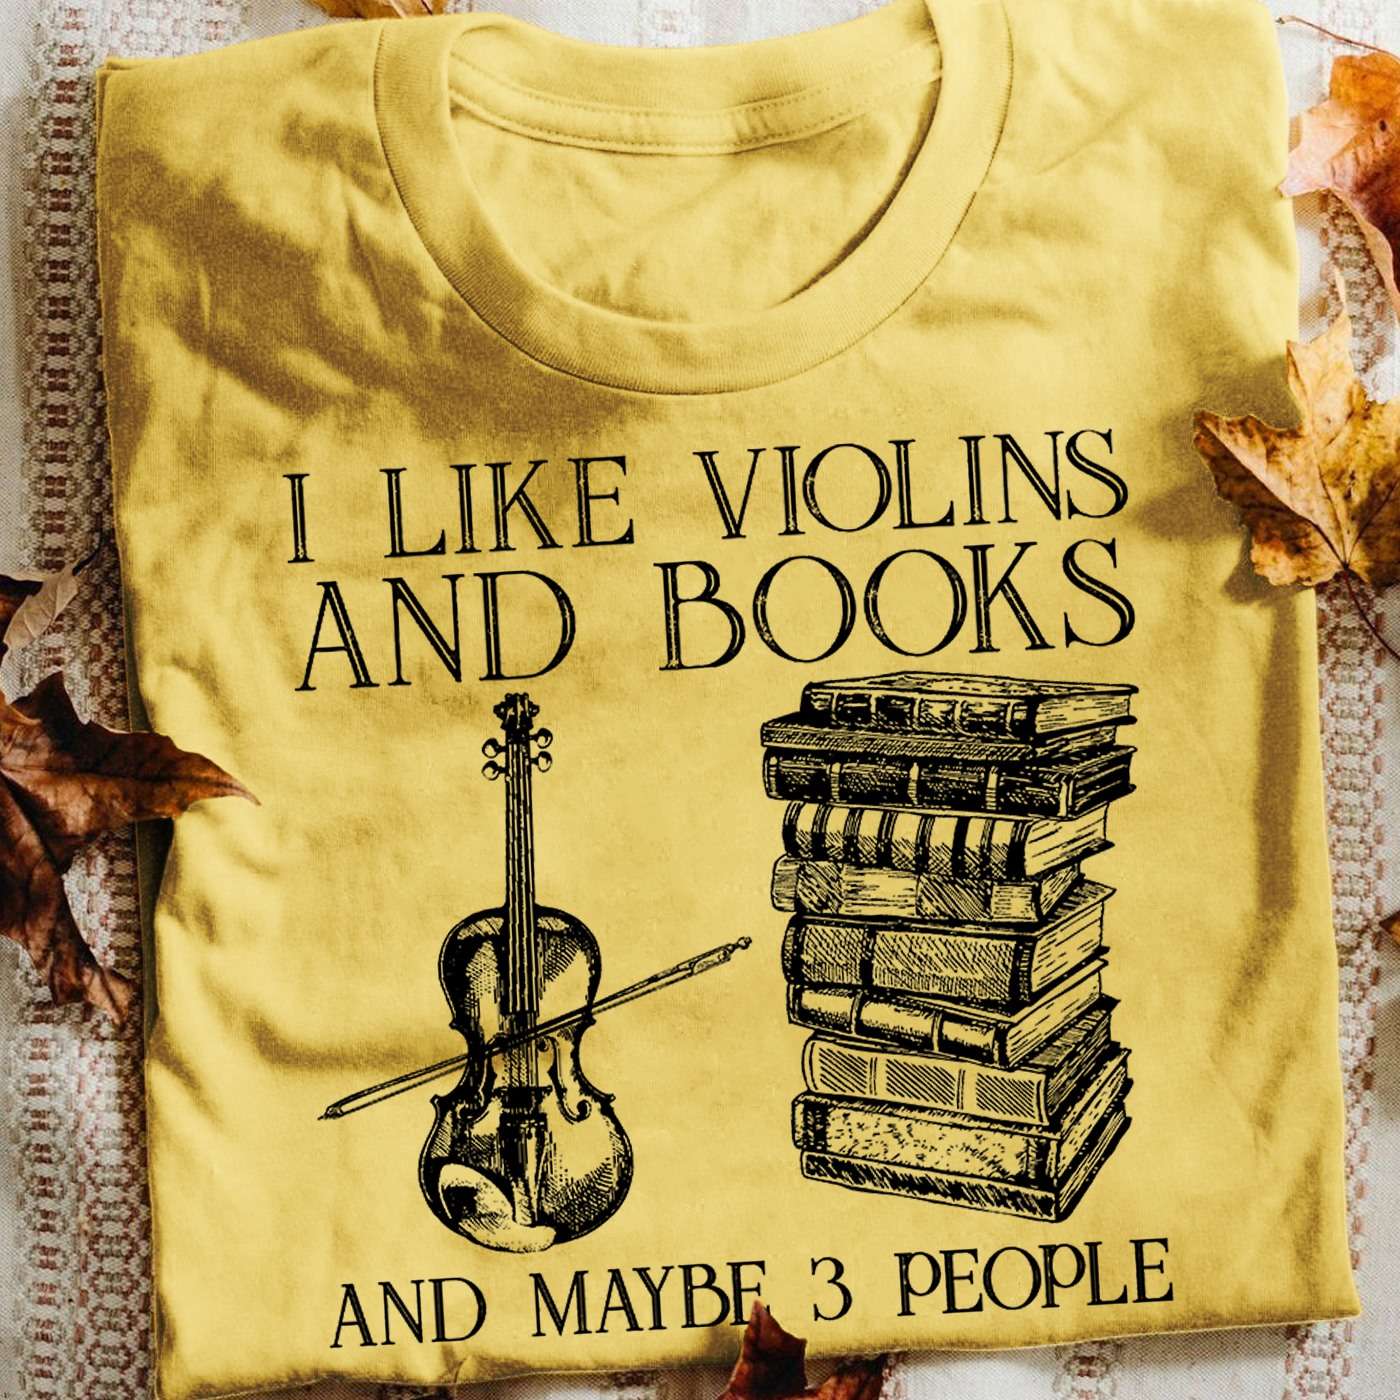 I like violins and books and maybe 3 people - Violins the instrument